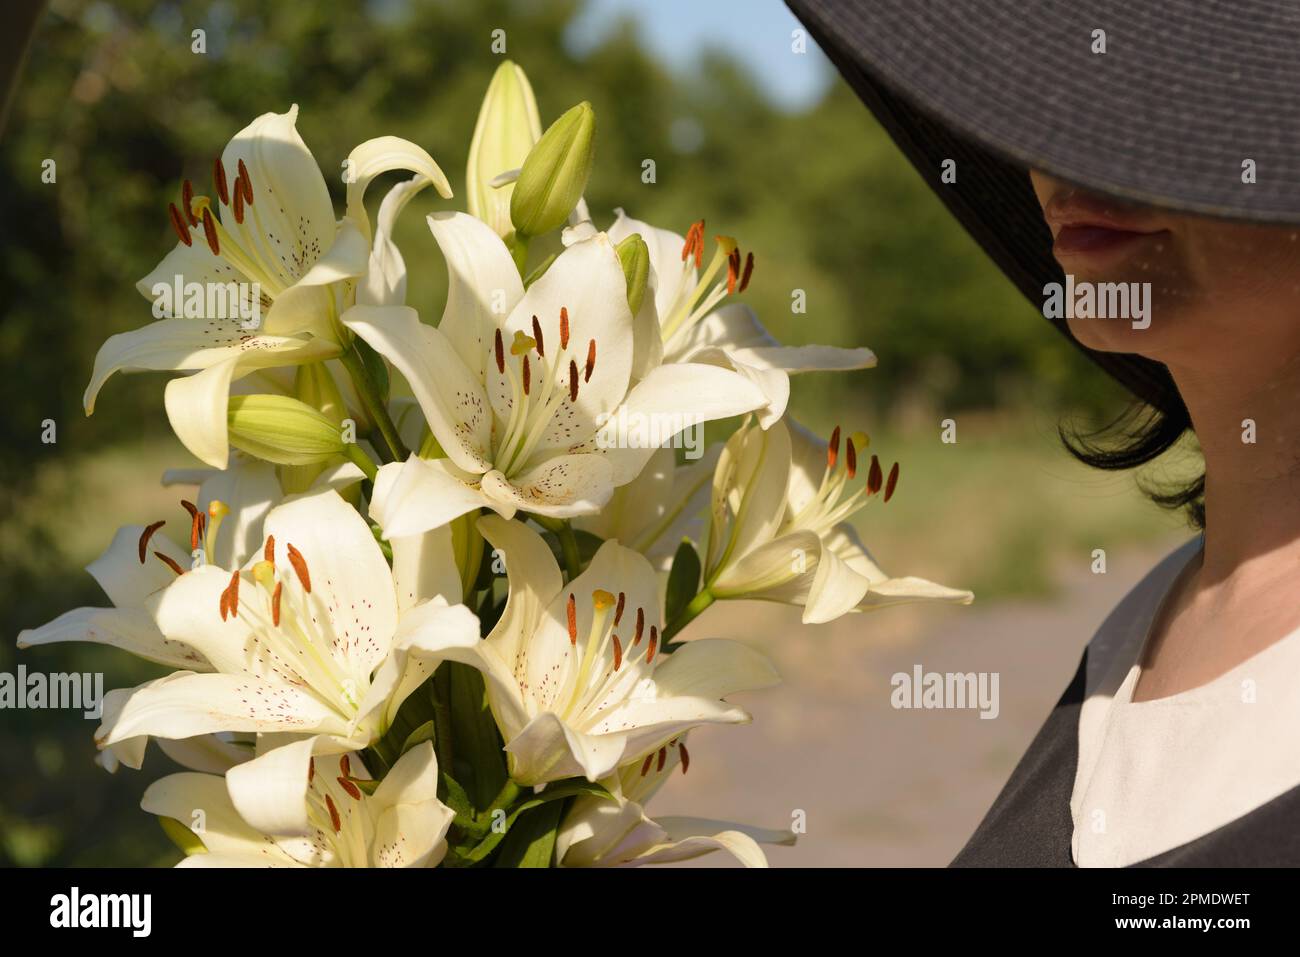 Bouquet of white lilies and a cropped portrait of a woman in a hat partially covering her face, side view. Stock Photo